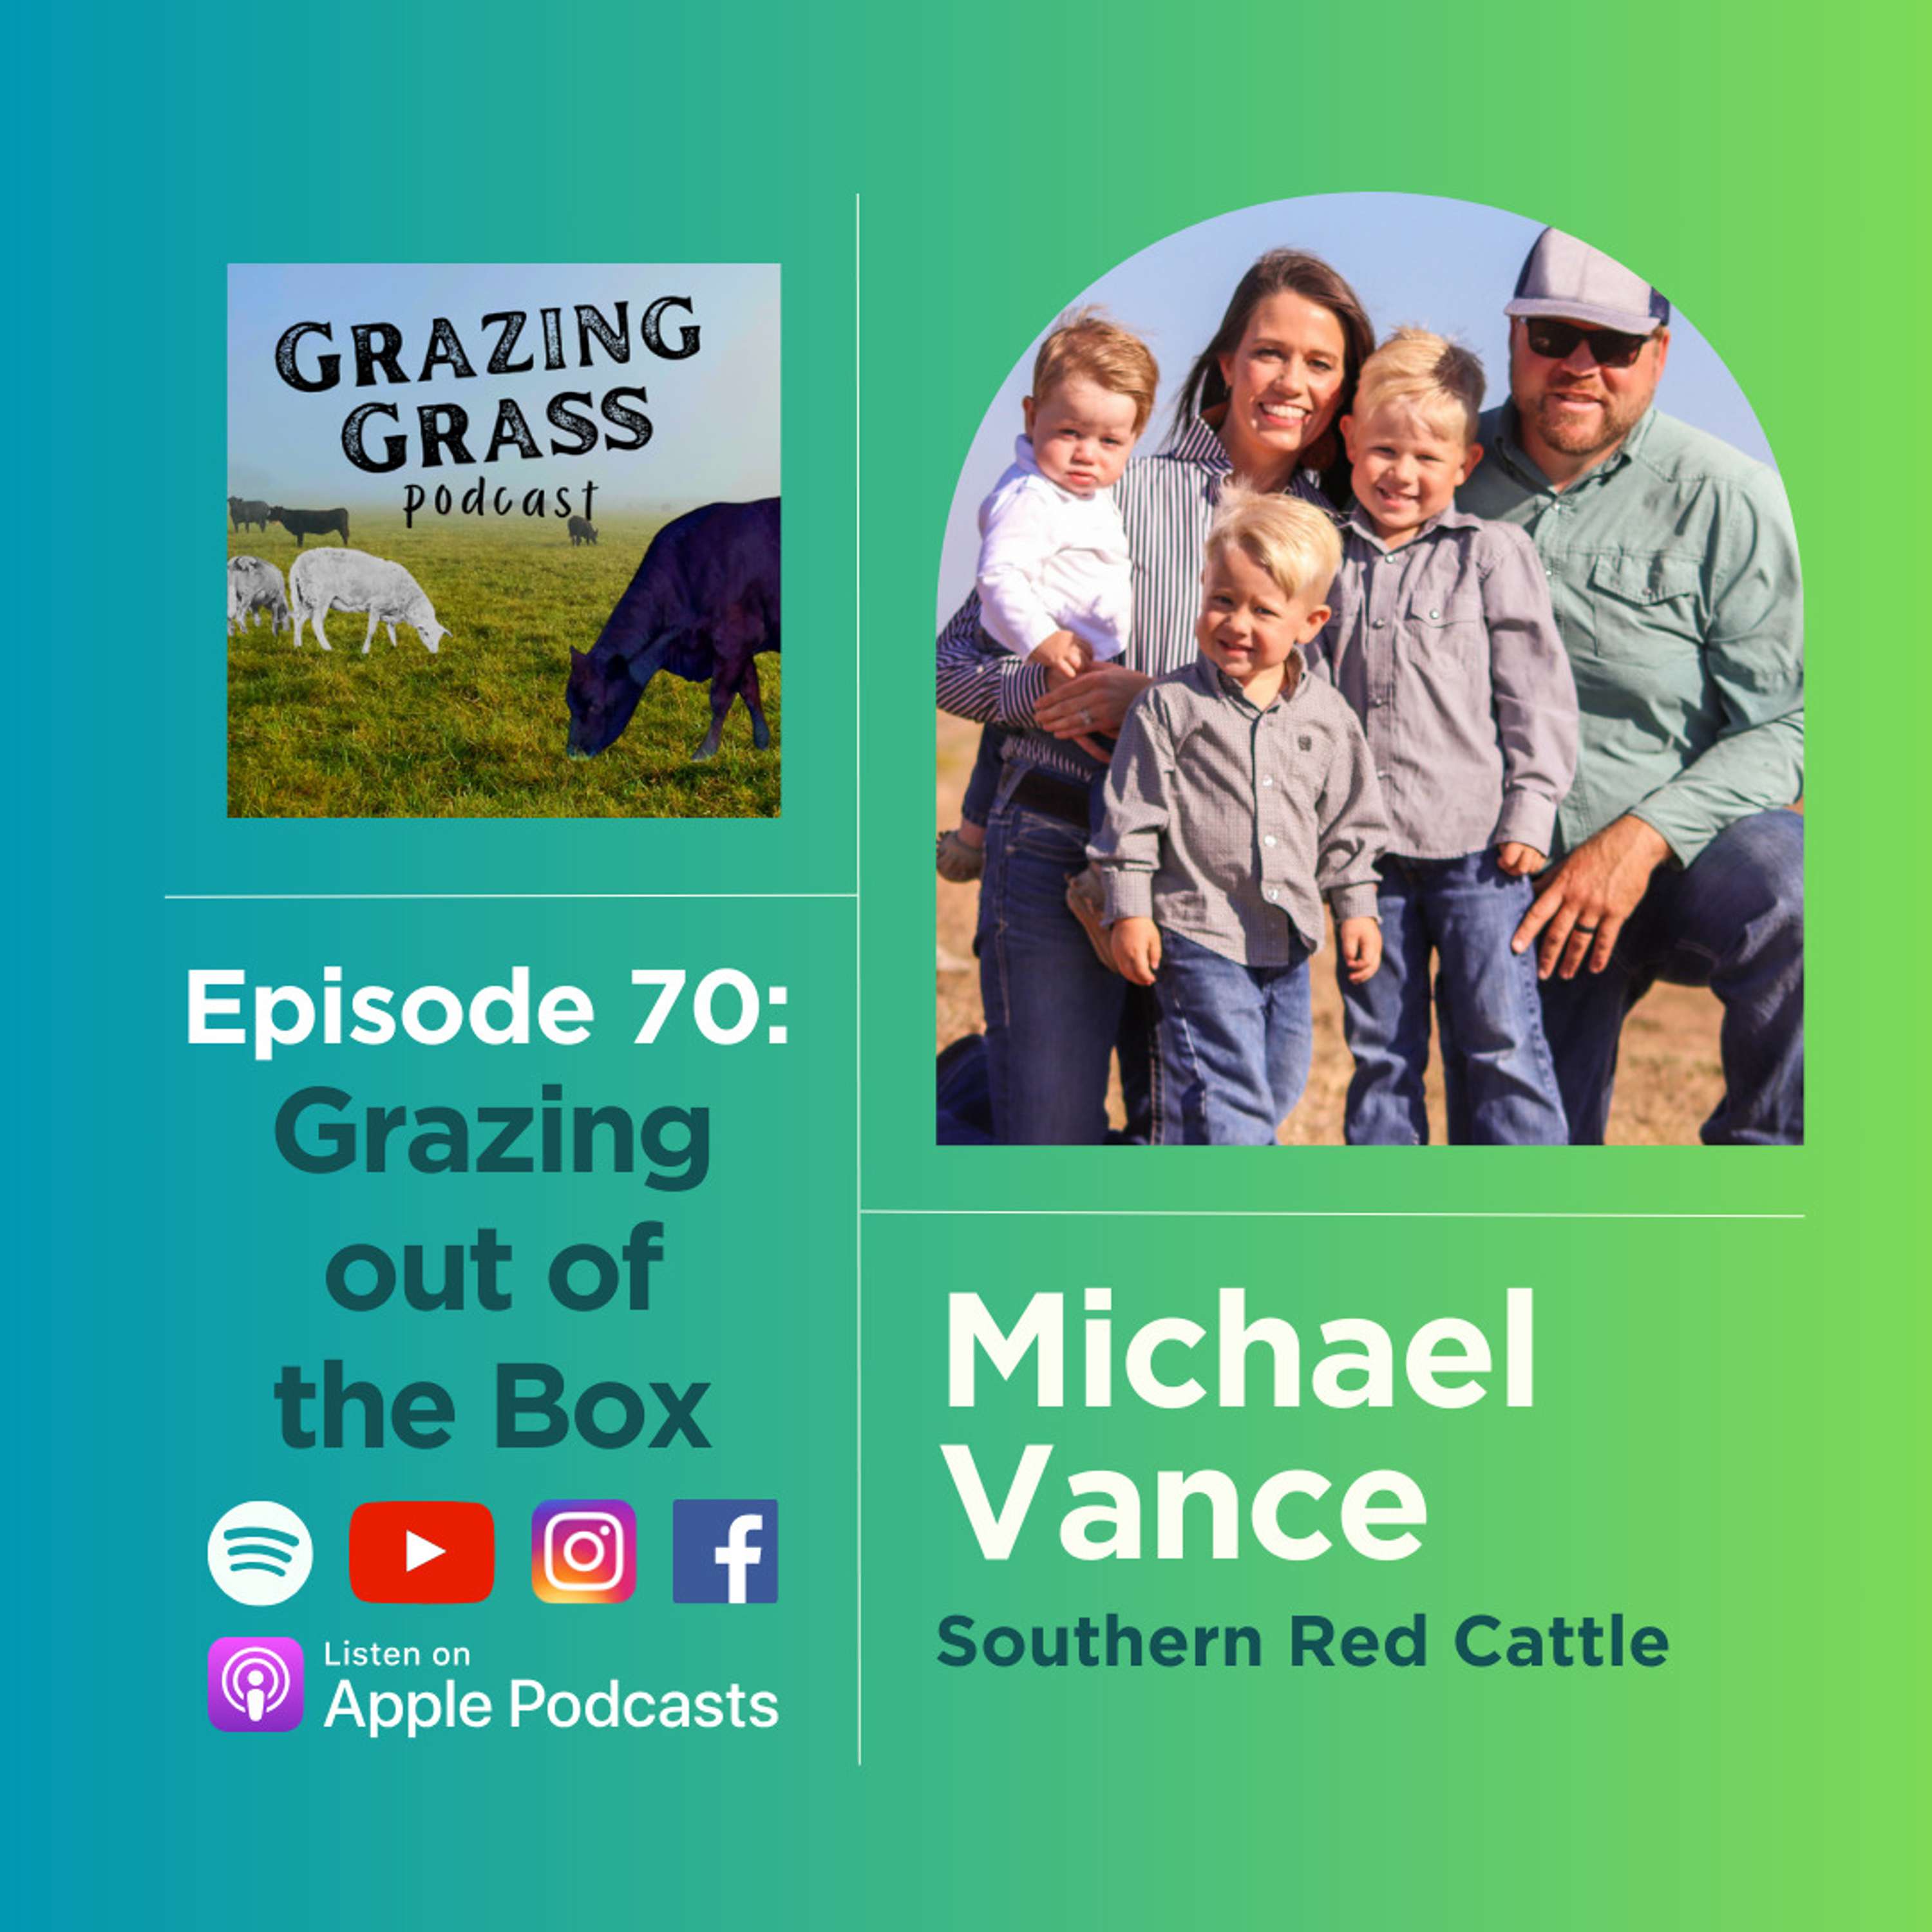 e70. Grazing Out of the Box with Michael Vance